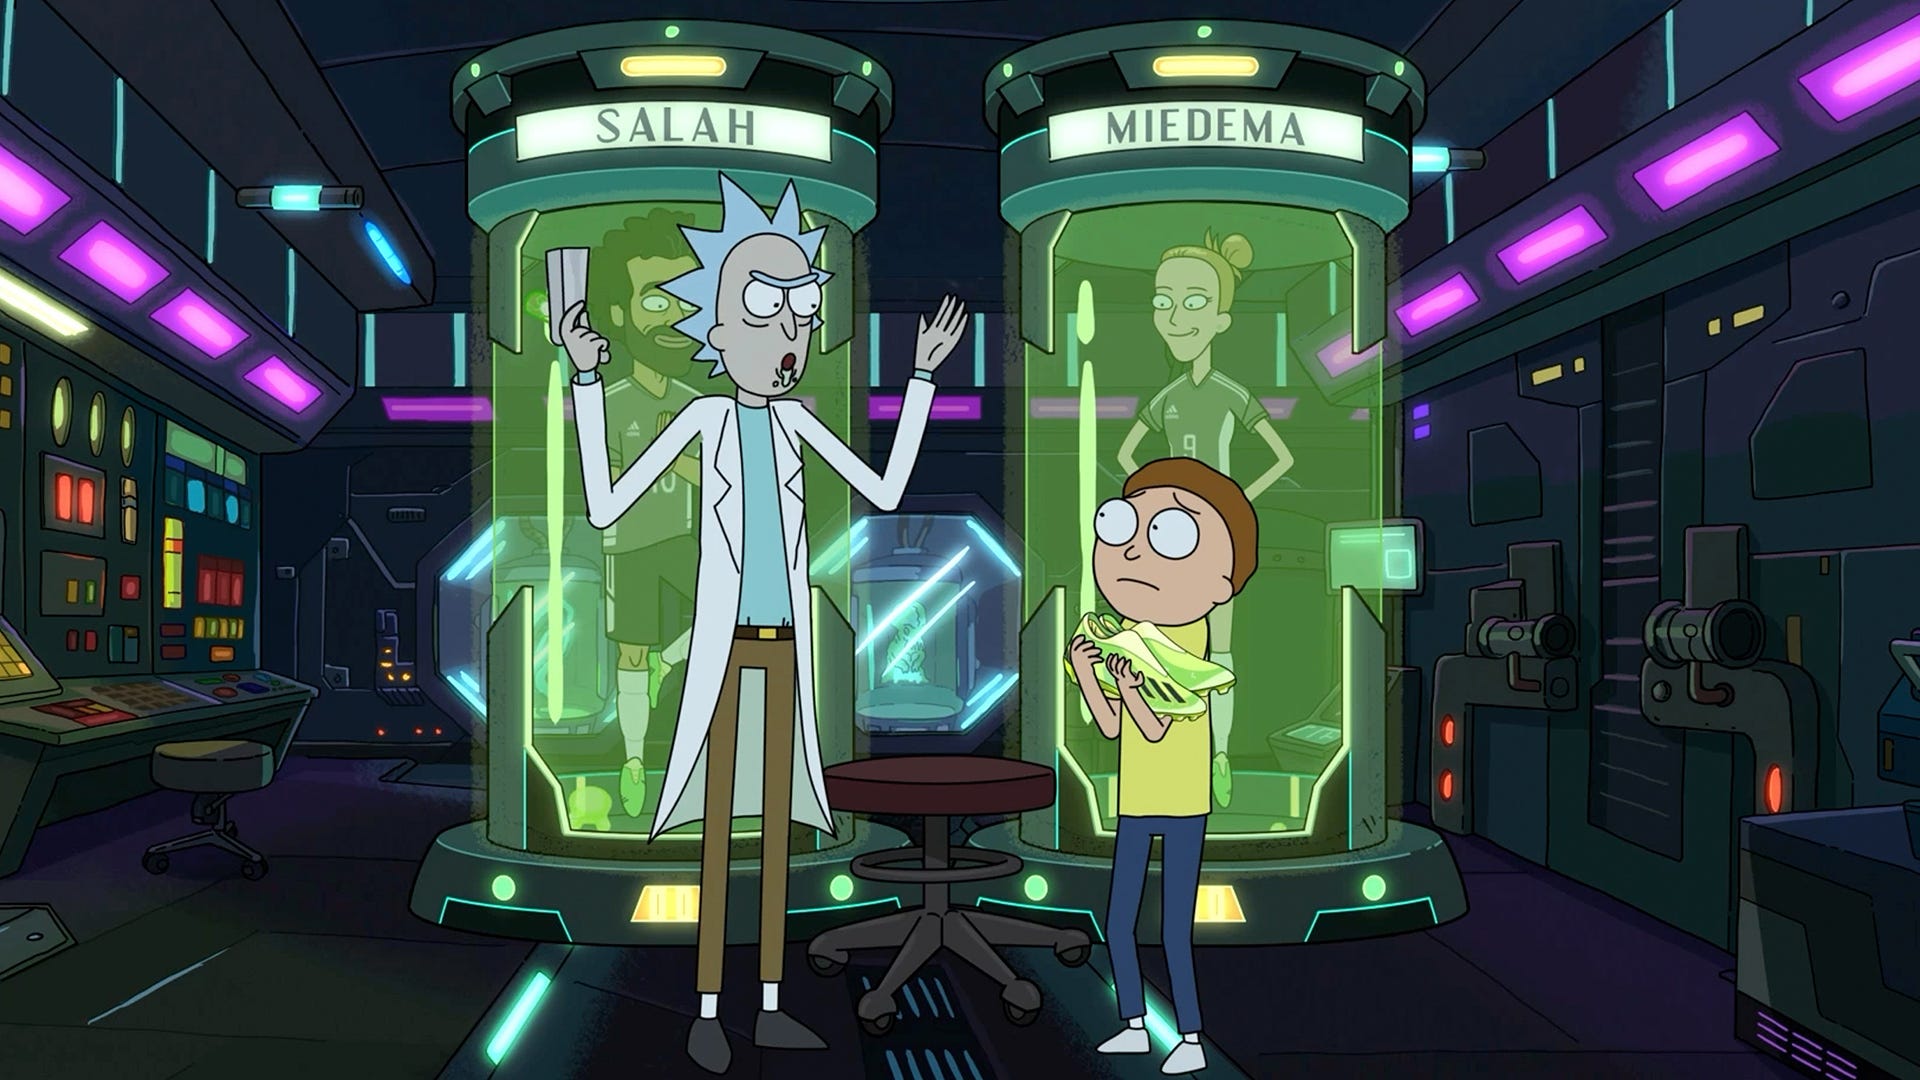 Speed, stability and Rick and Morty: Explaining adidas’ new X ...